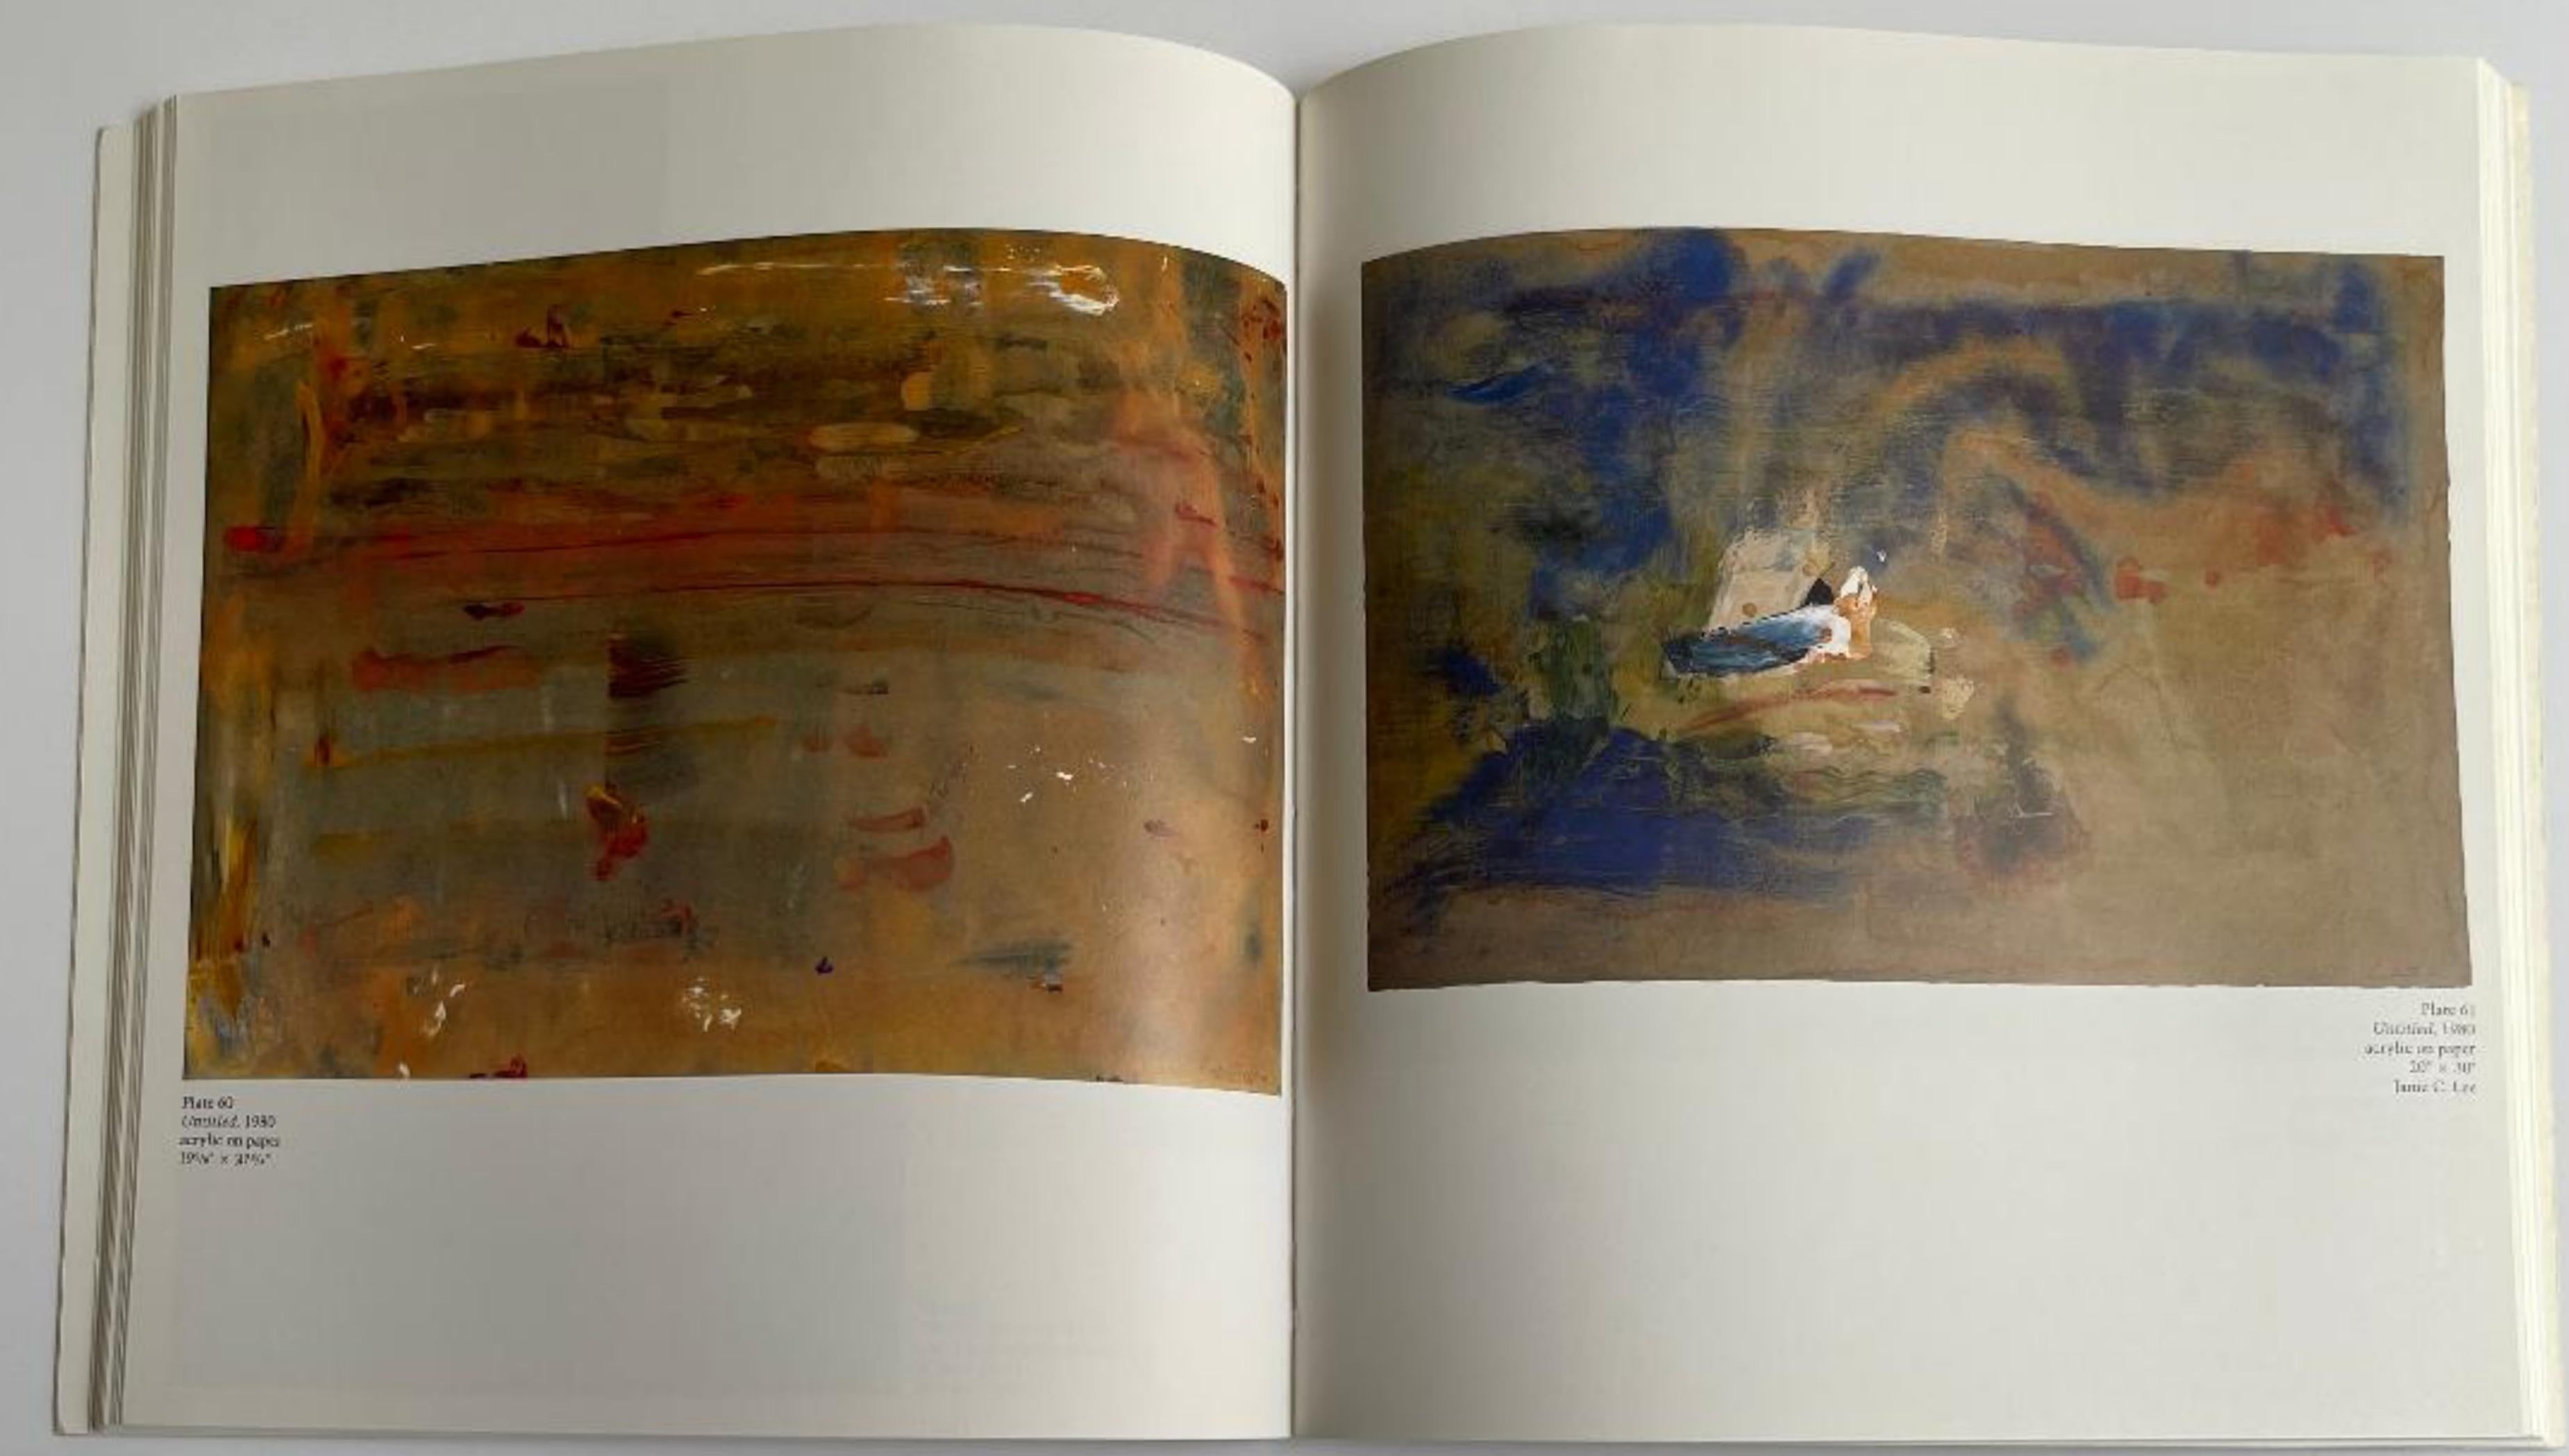 Winning buyer: Try entering code FREESHIP for complimentary packing and shipping at checkout. (Some exceptions apply)
Helen Frankenthaler
Frankenthaler, Works on Paper 1949-1984 (Hand signed and inscribed to Dick Polich, Founder of Tallix Foundry),